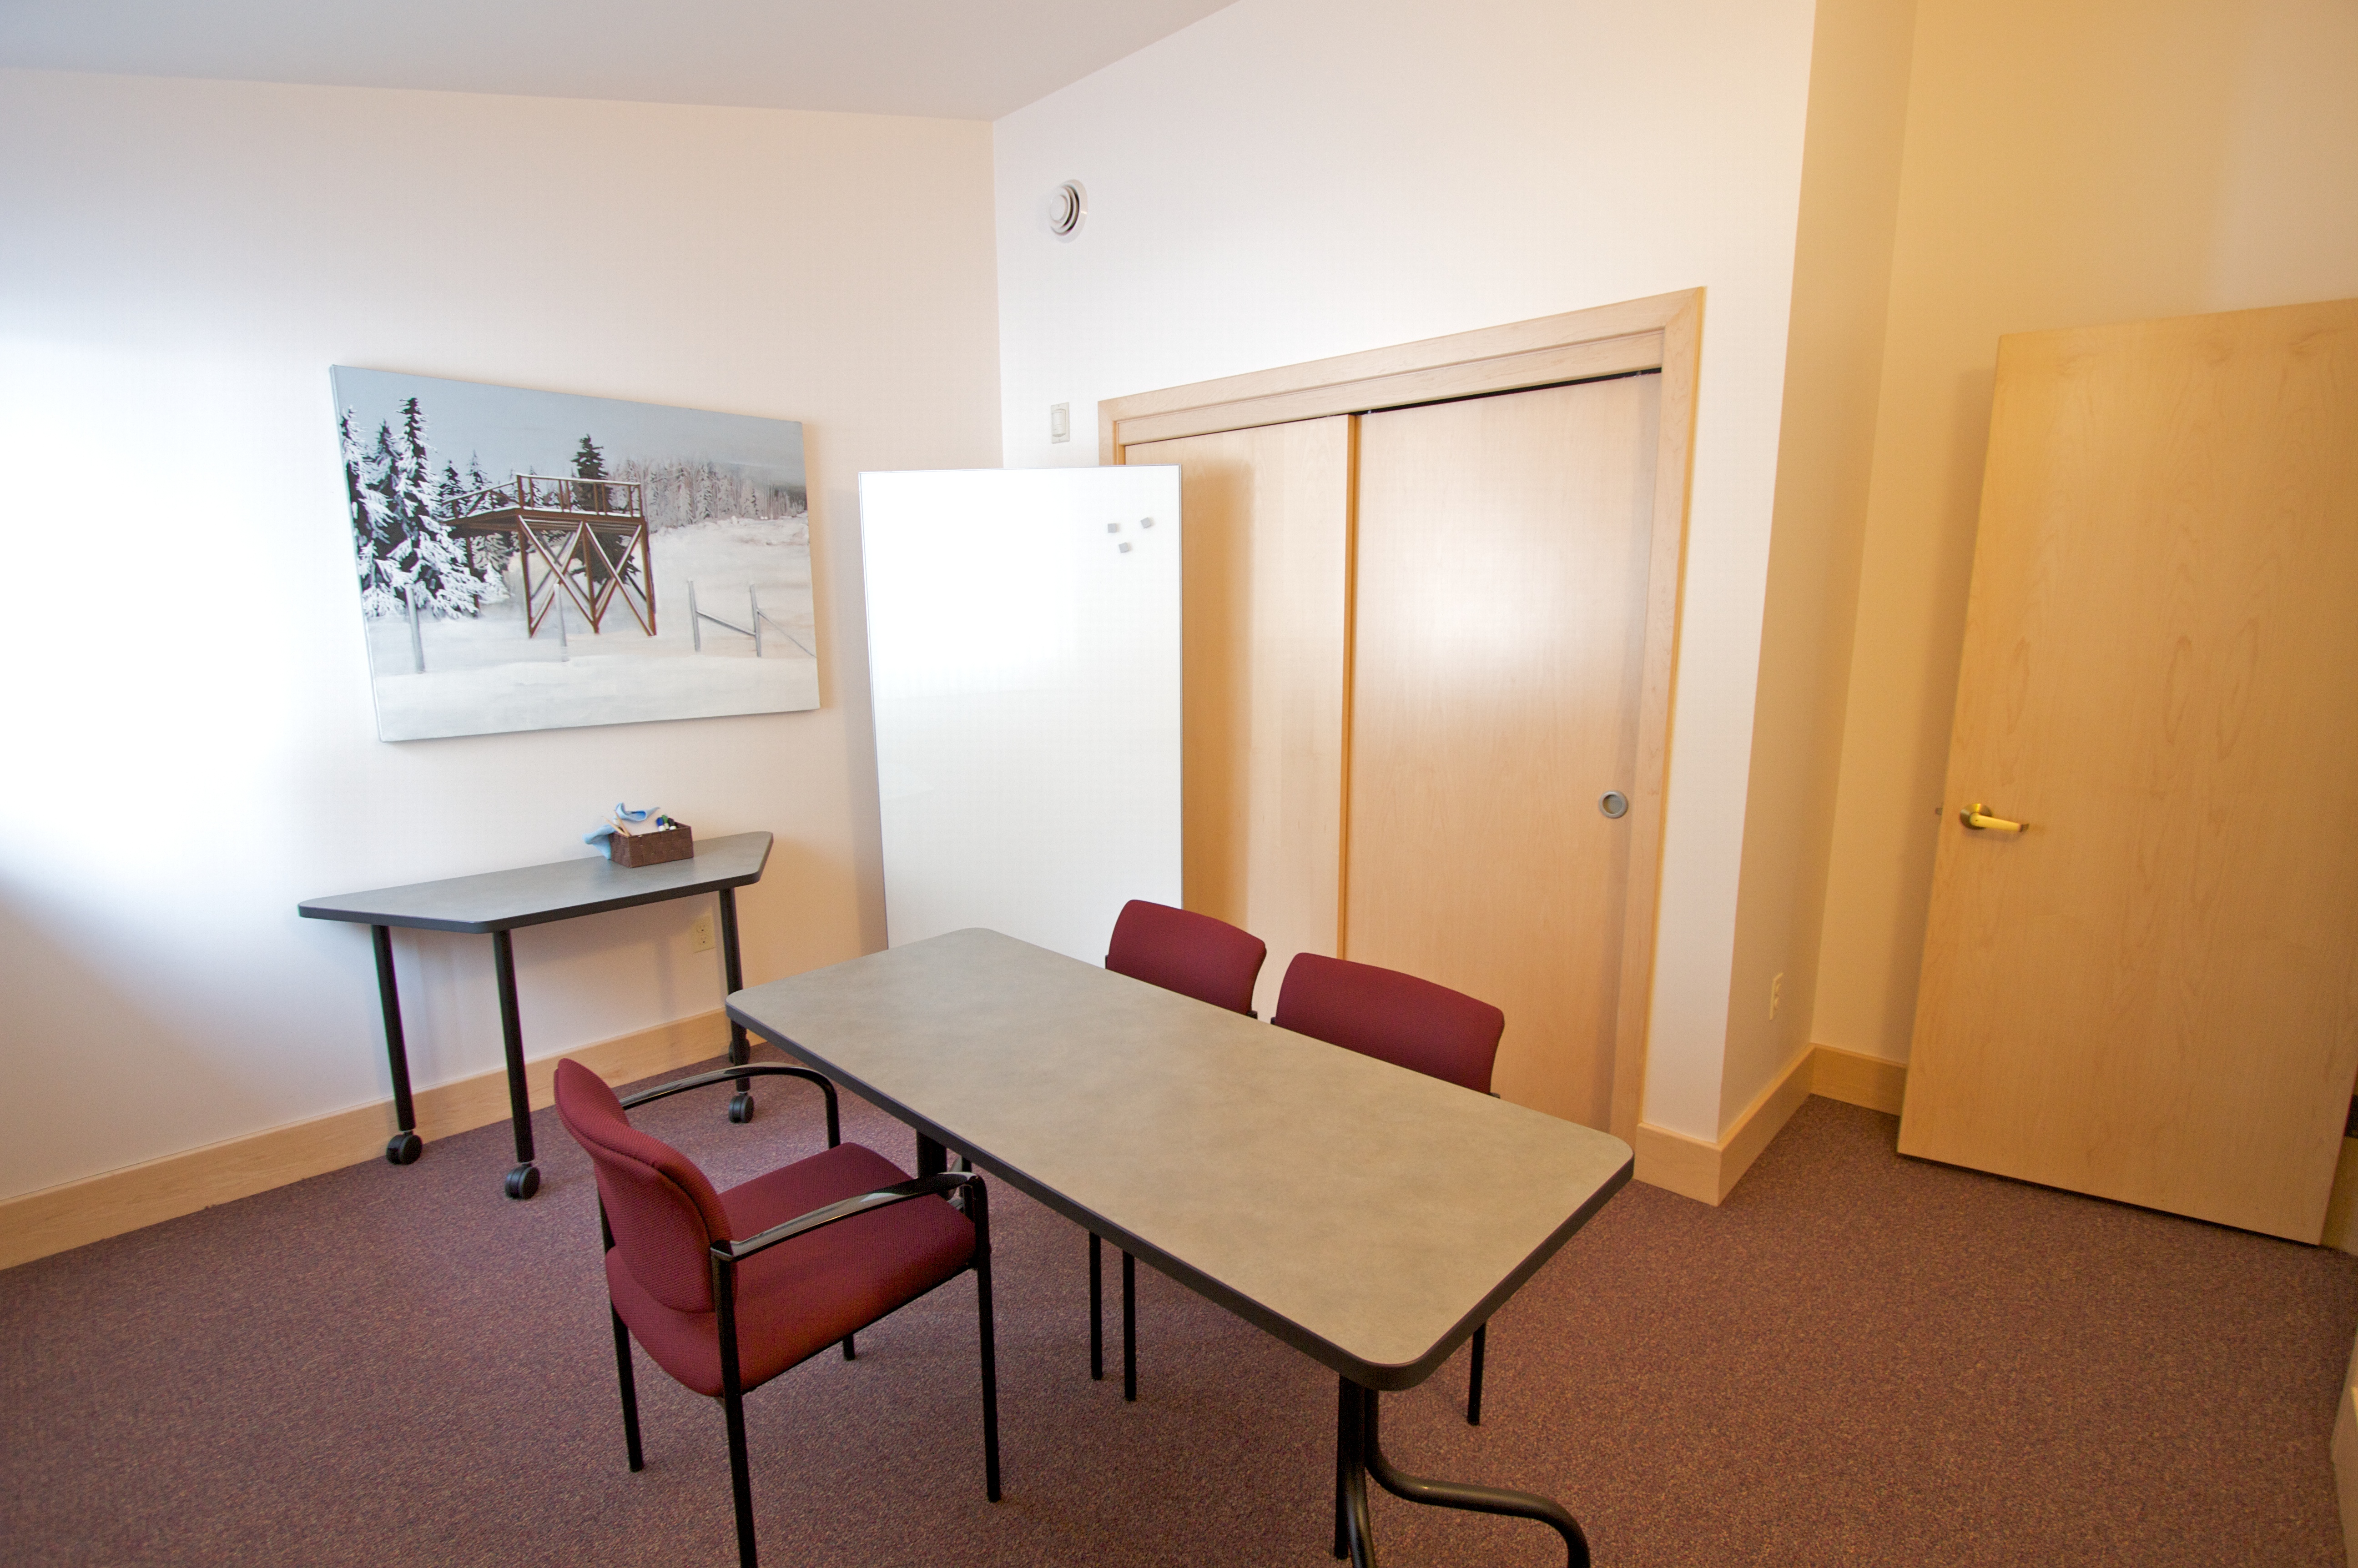 Two small rooms are available as break-out rooms for meetings or conferences.